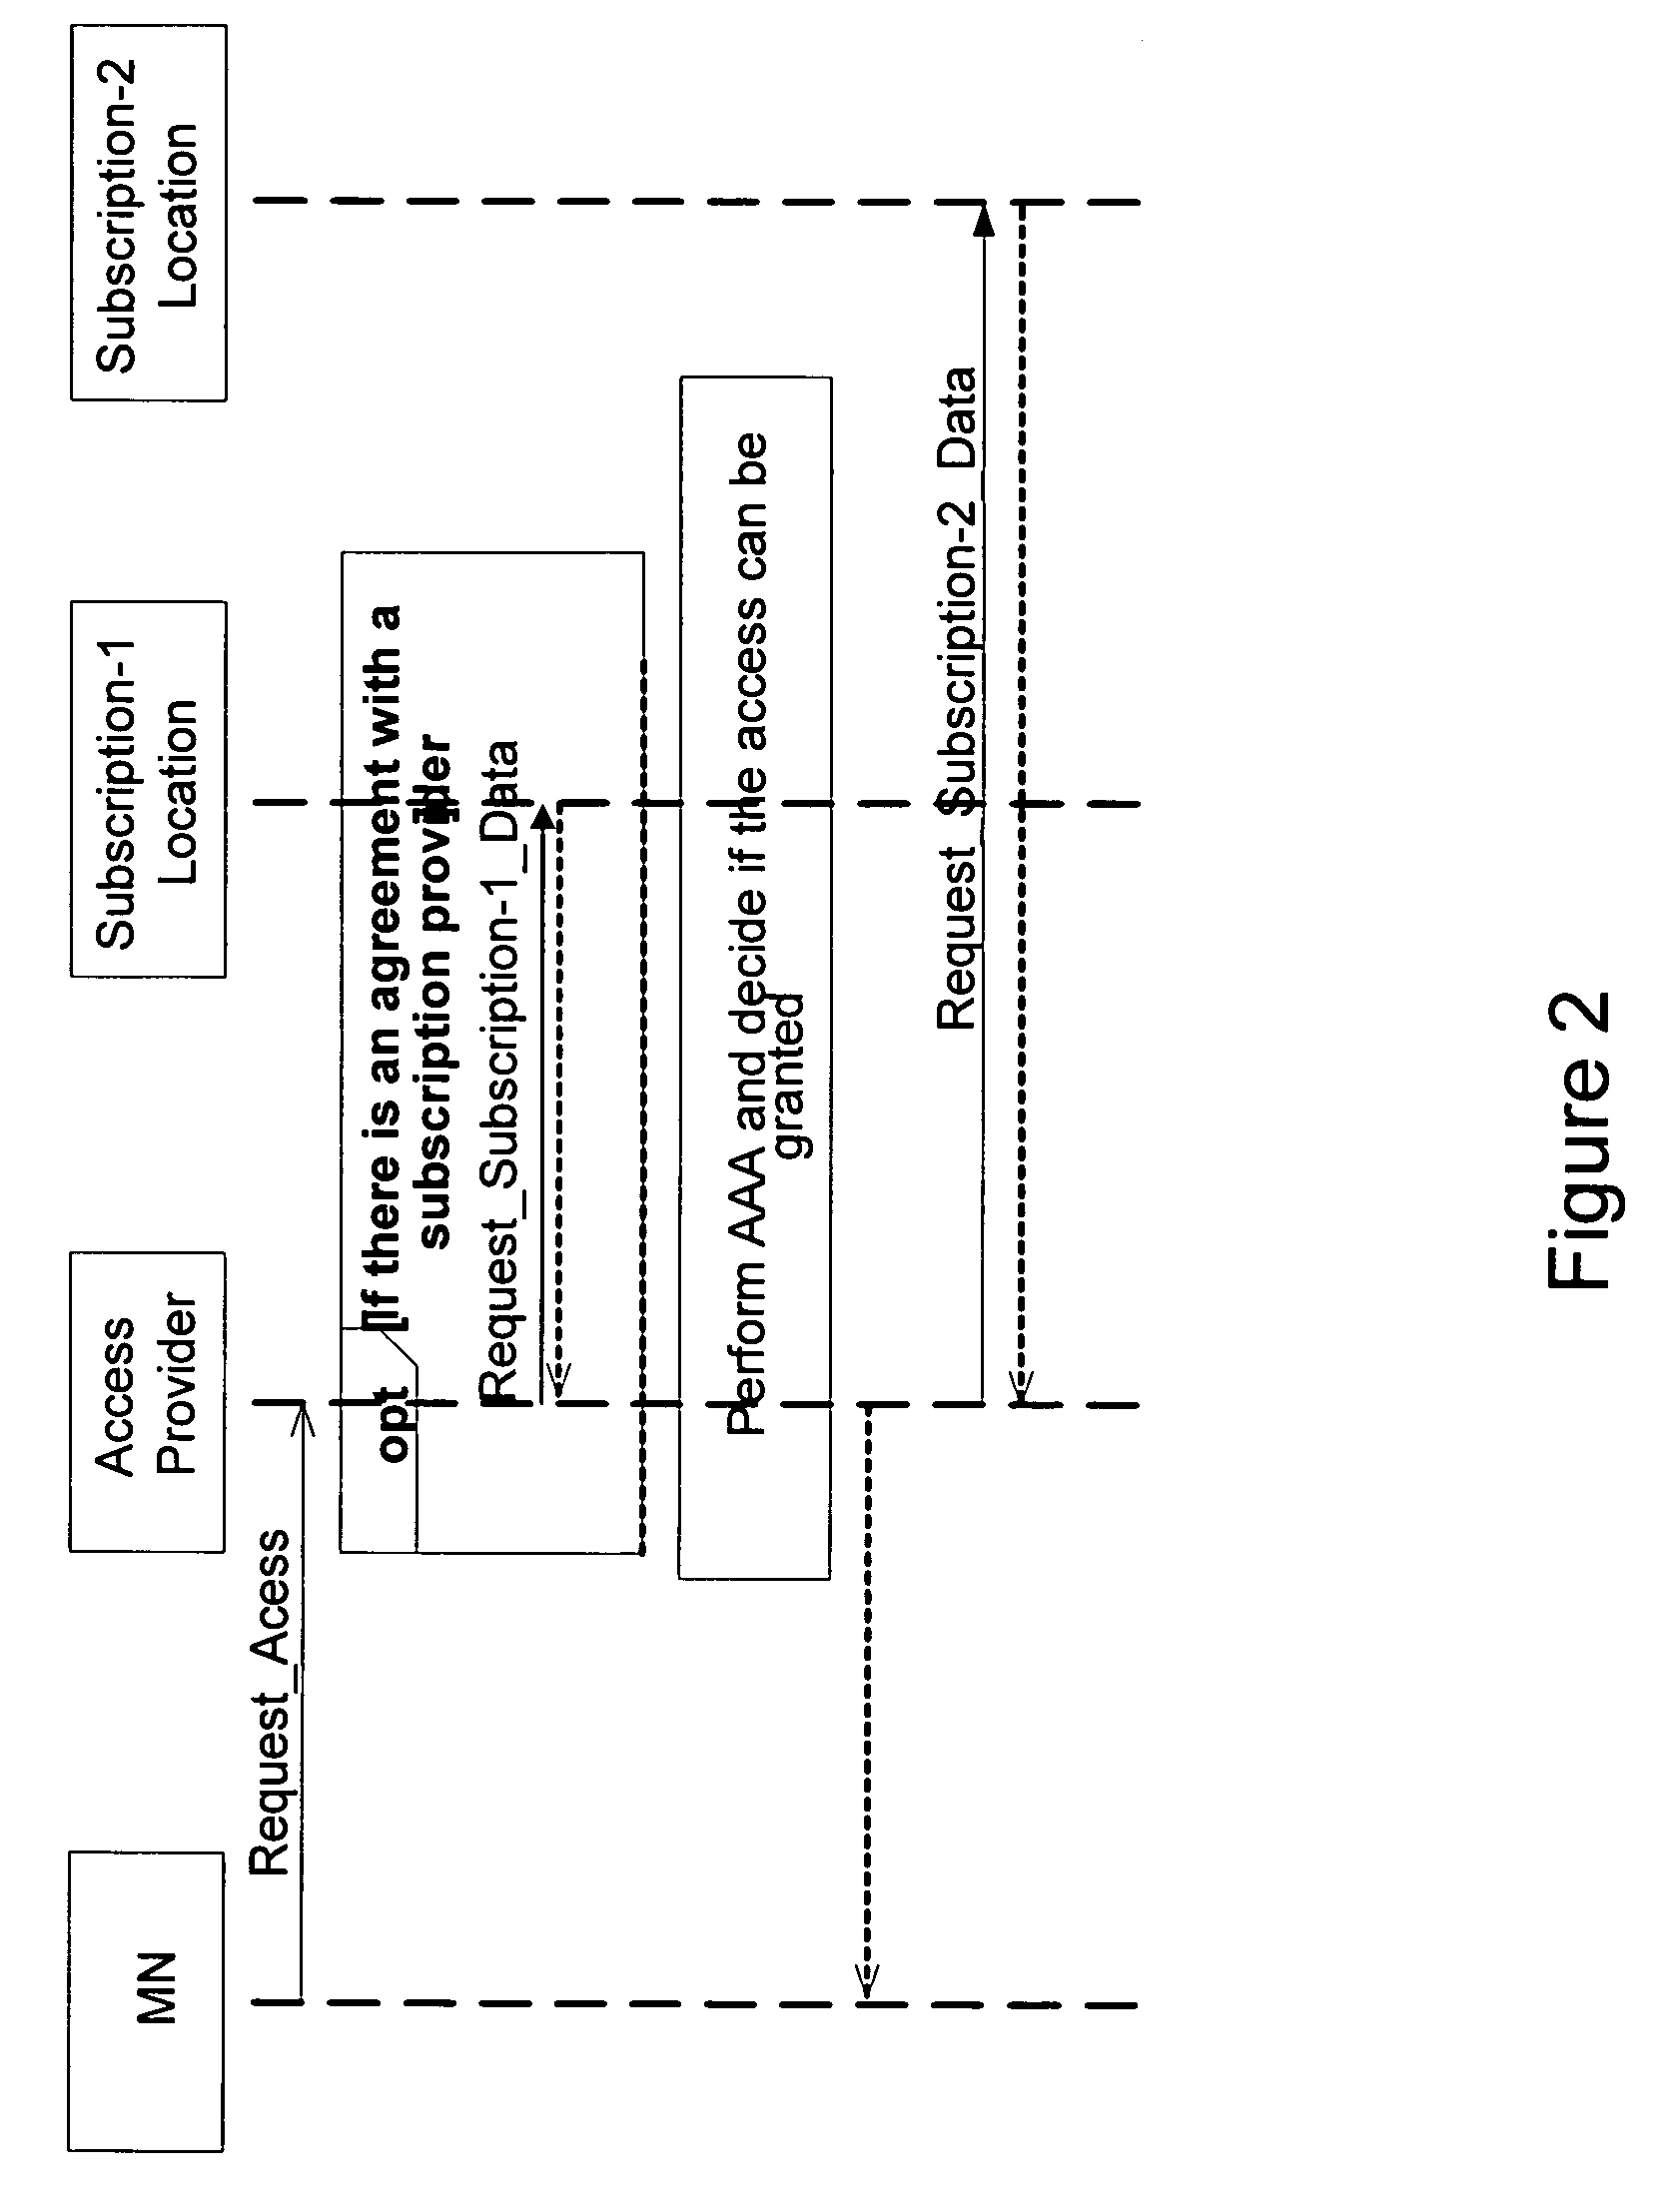 Pro-active access handling in a multi-access network environment